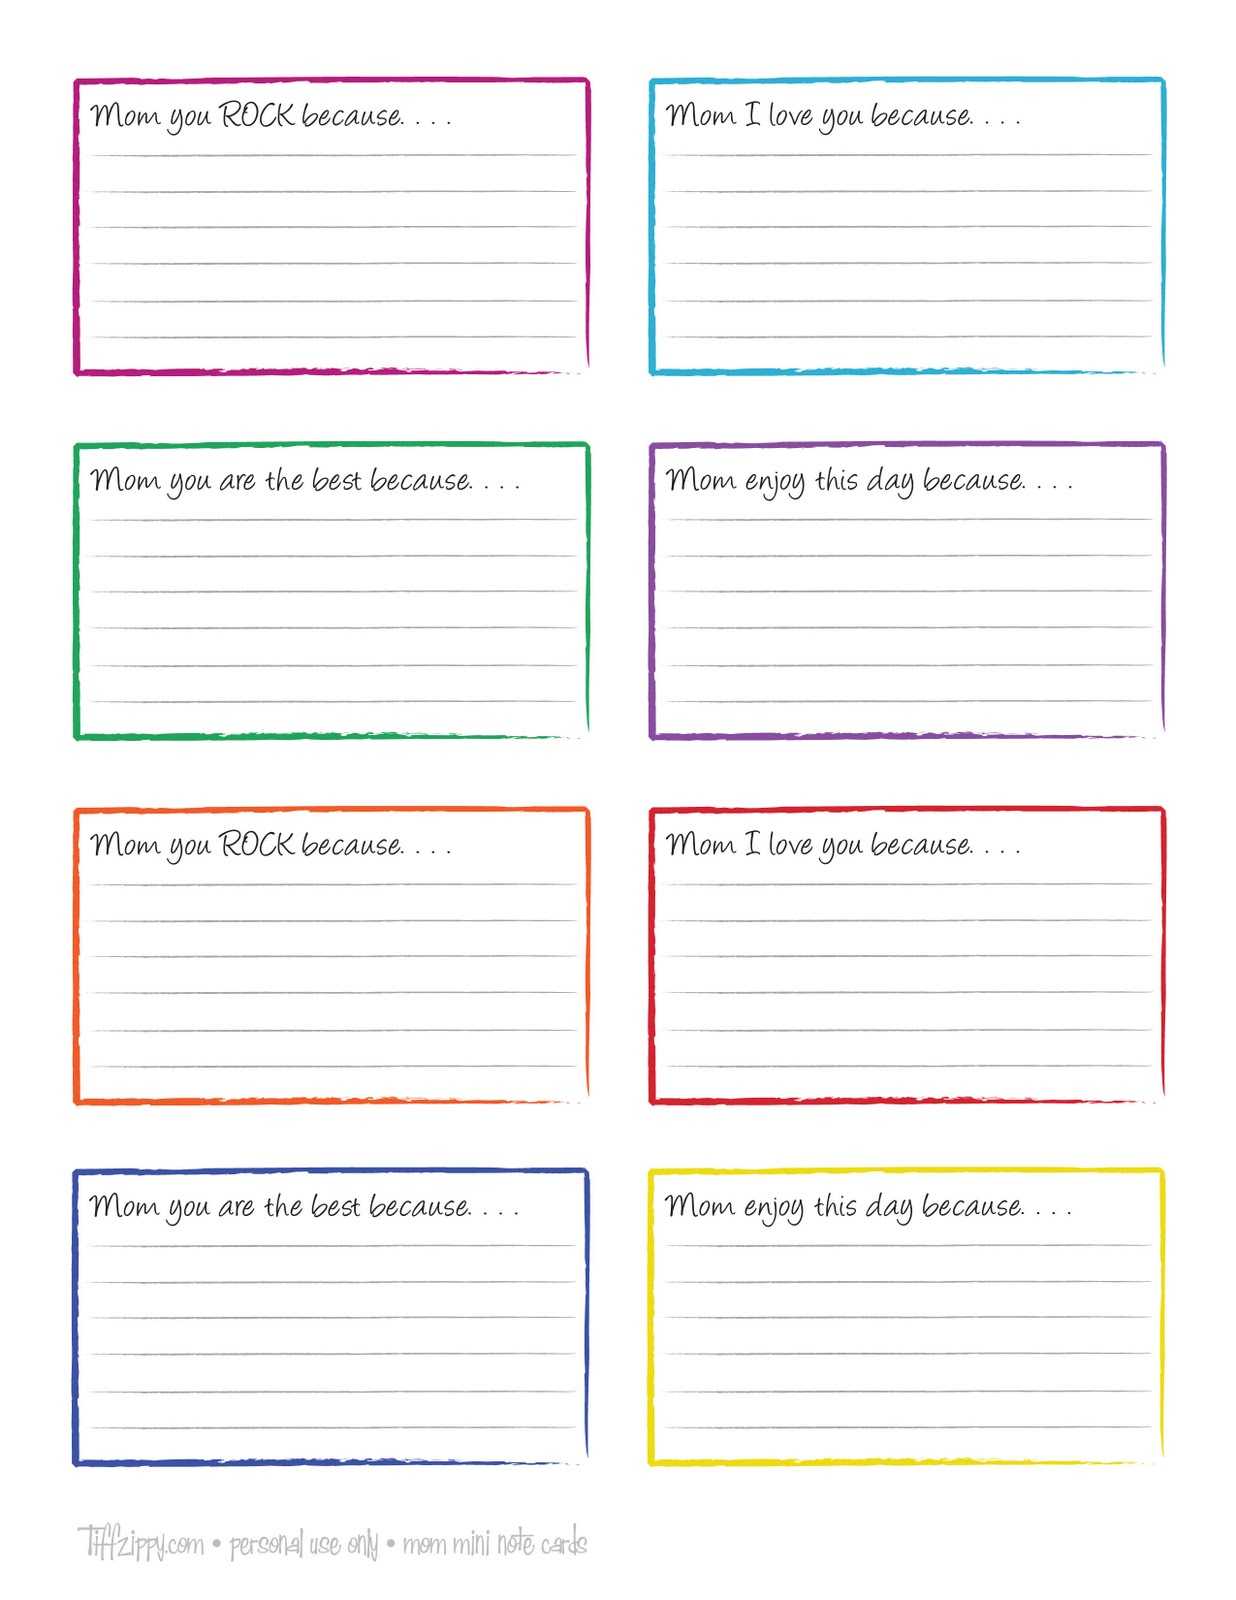 300 Index Cards: Index Cards Online Template Pertaining To 4X6 Note Card Template Word